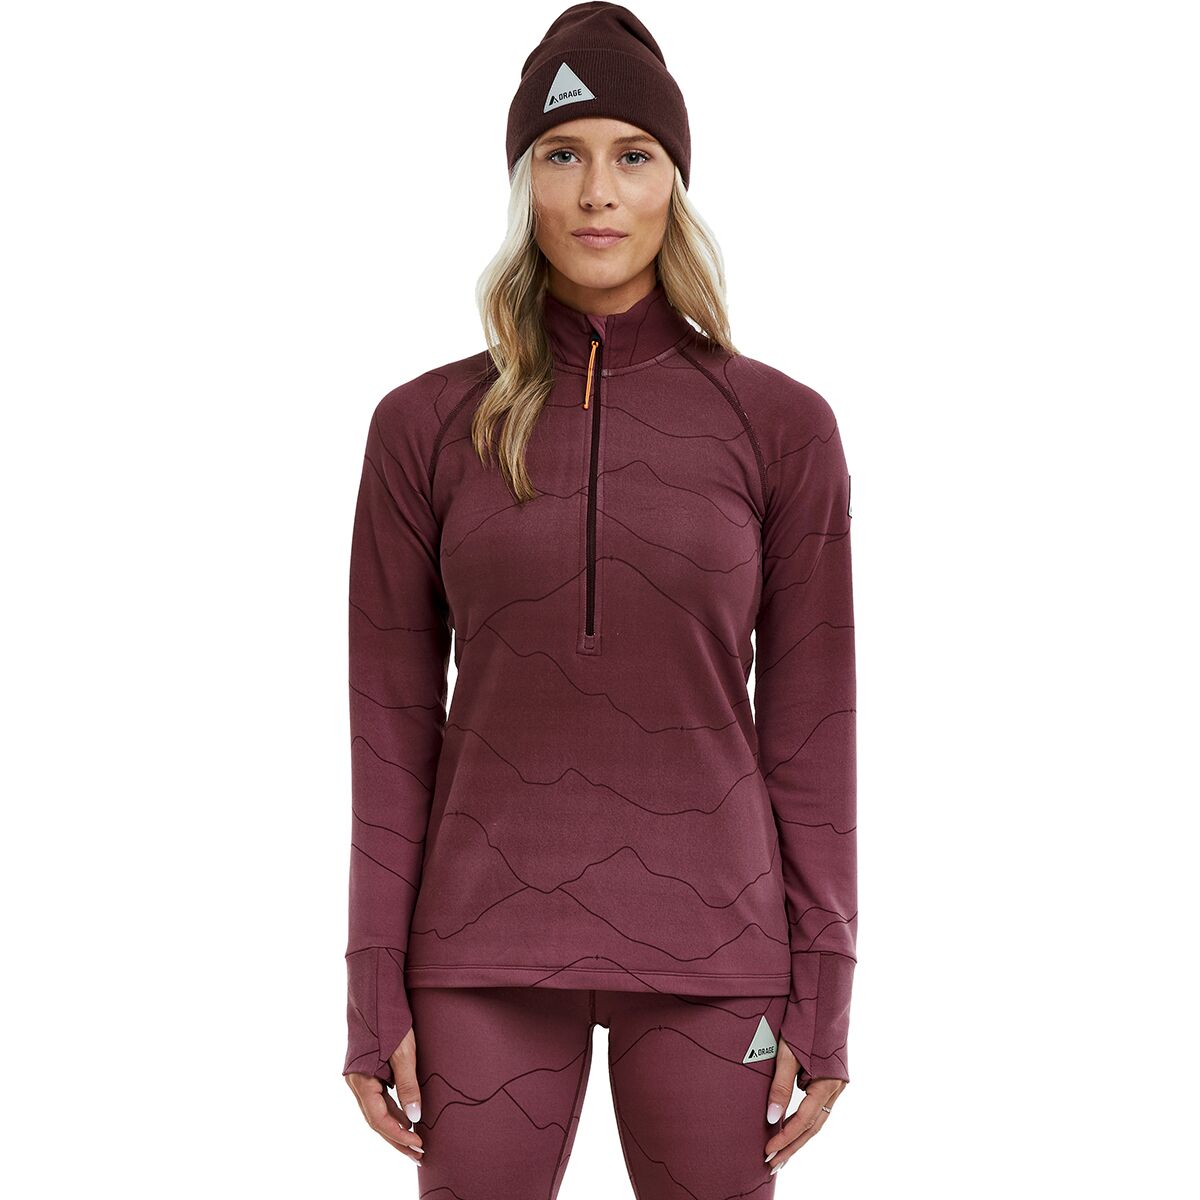 Orage Harebelly Base Layer Top - Women's Mountains/Cherry